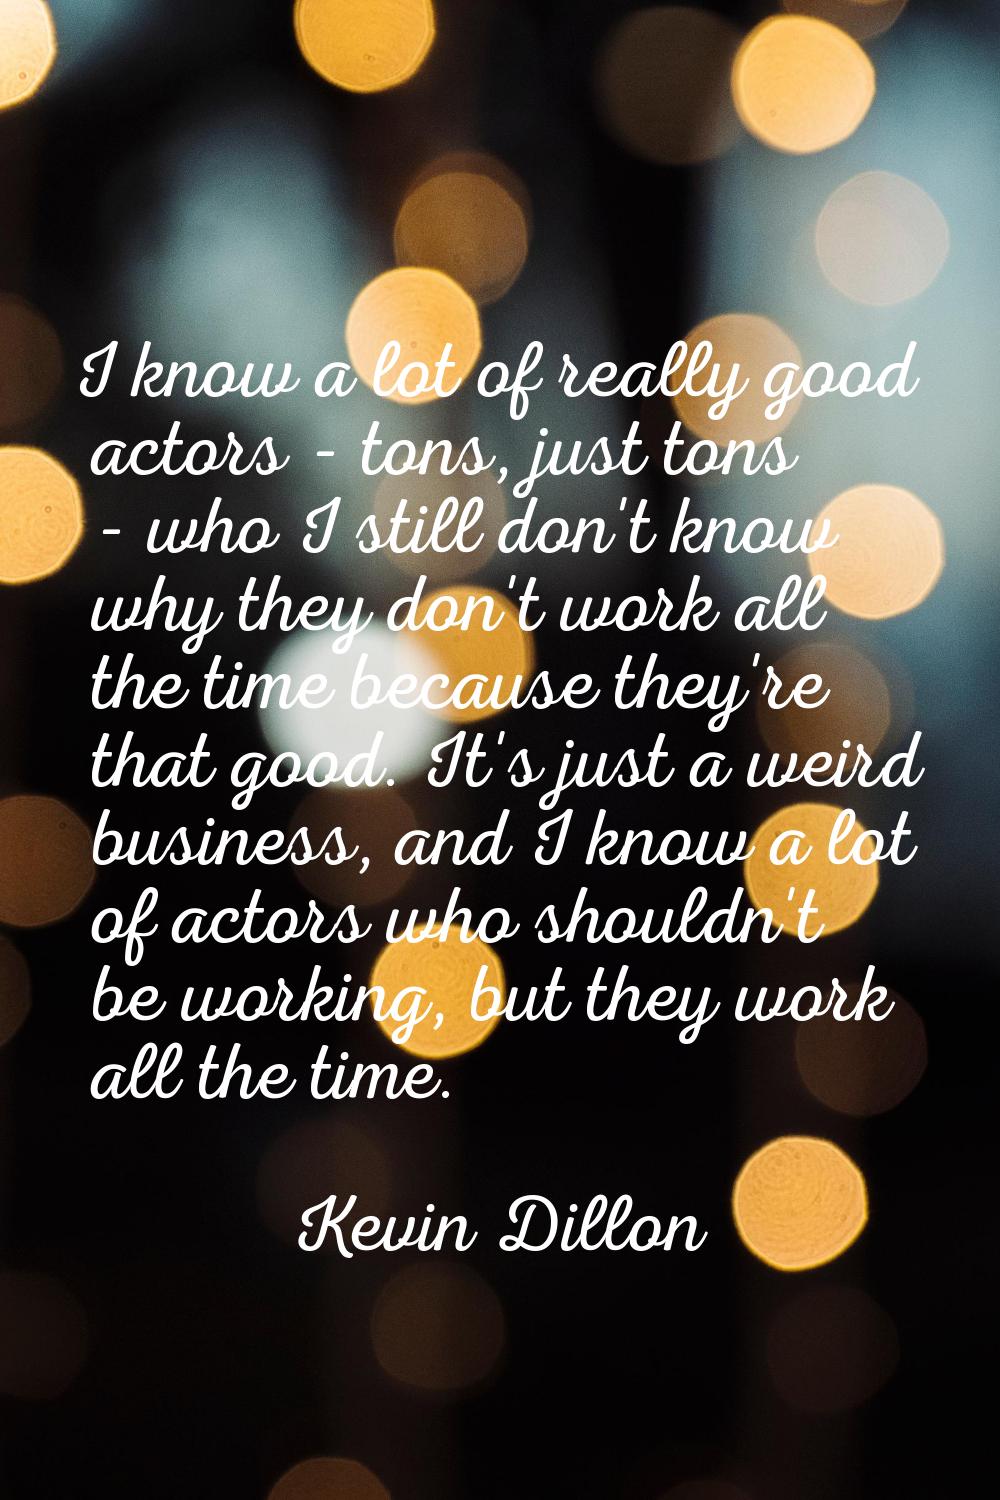 I know a lot of really good actors - tons, just tons - who I still don't know why they don't work a